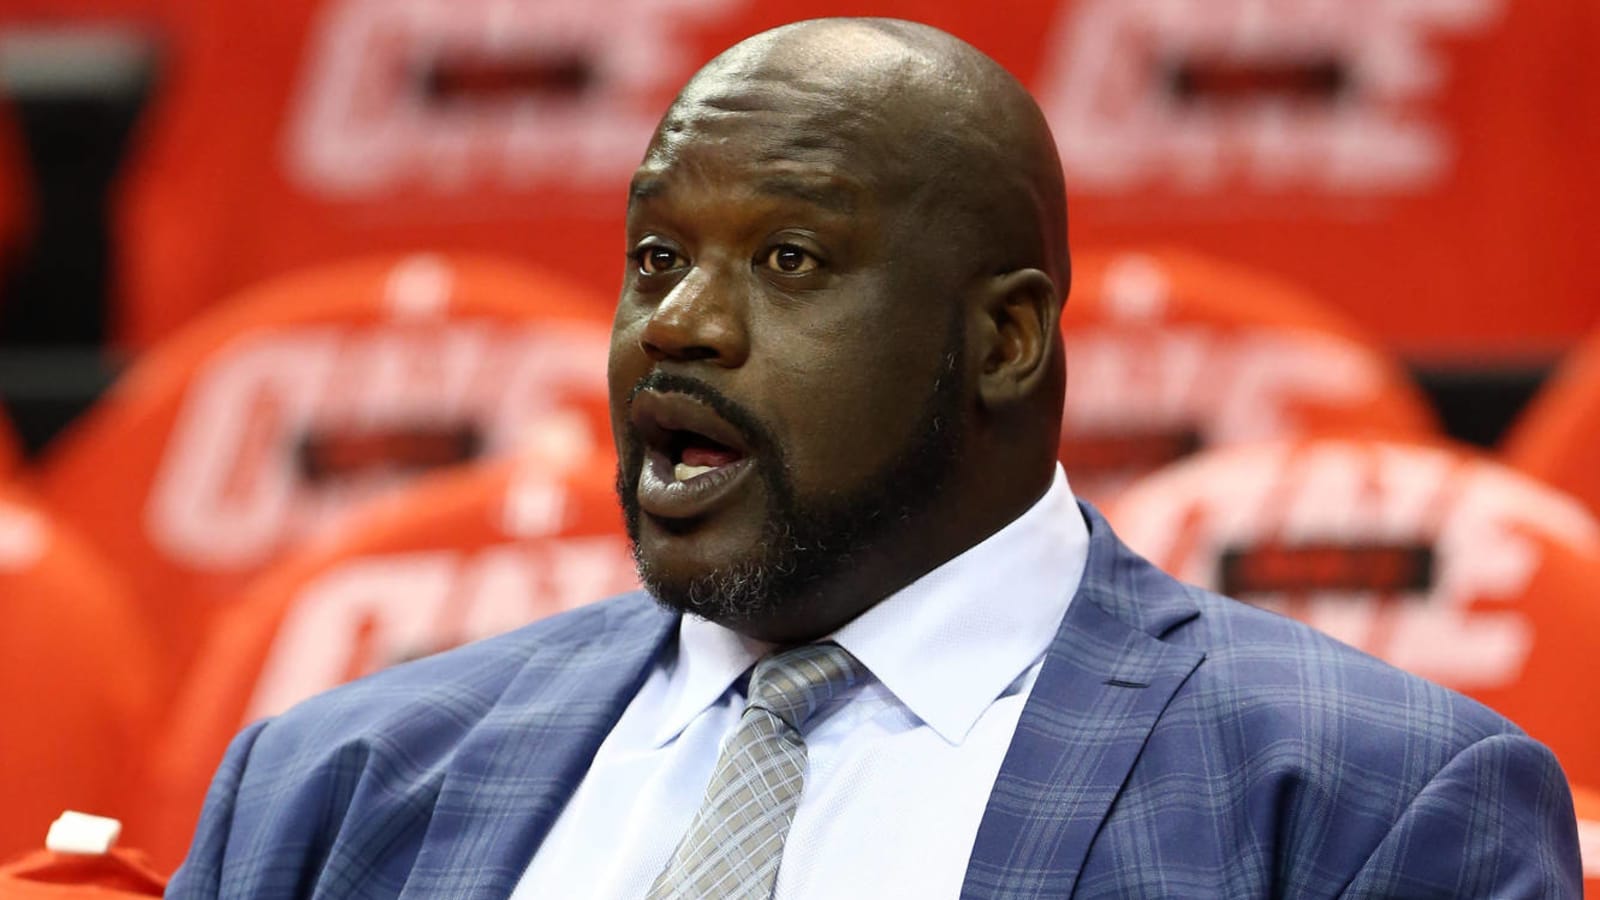 Watch: Shaquille O'Neal claims to have proof Stevie Wonder isn’t blind